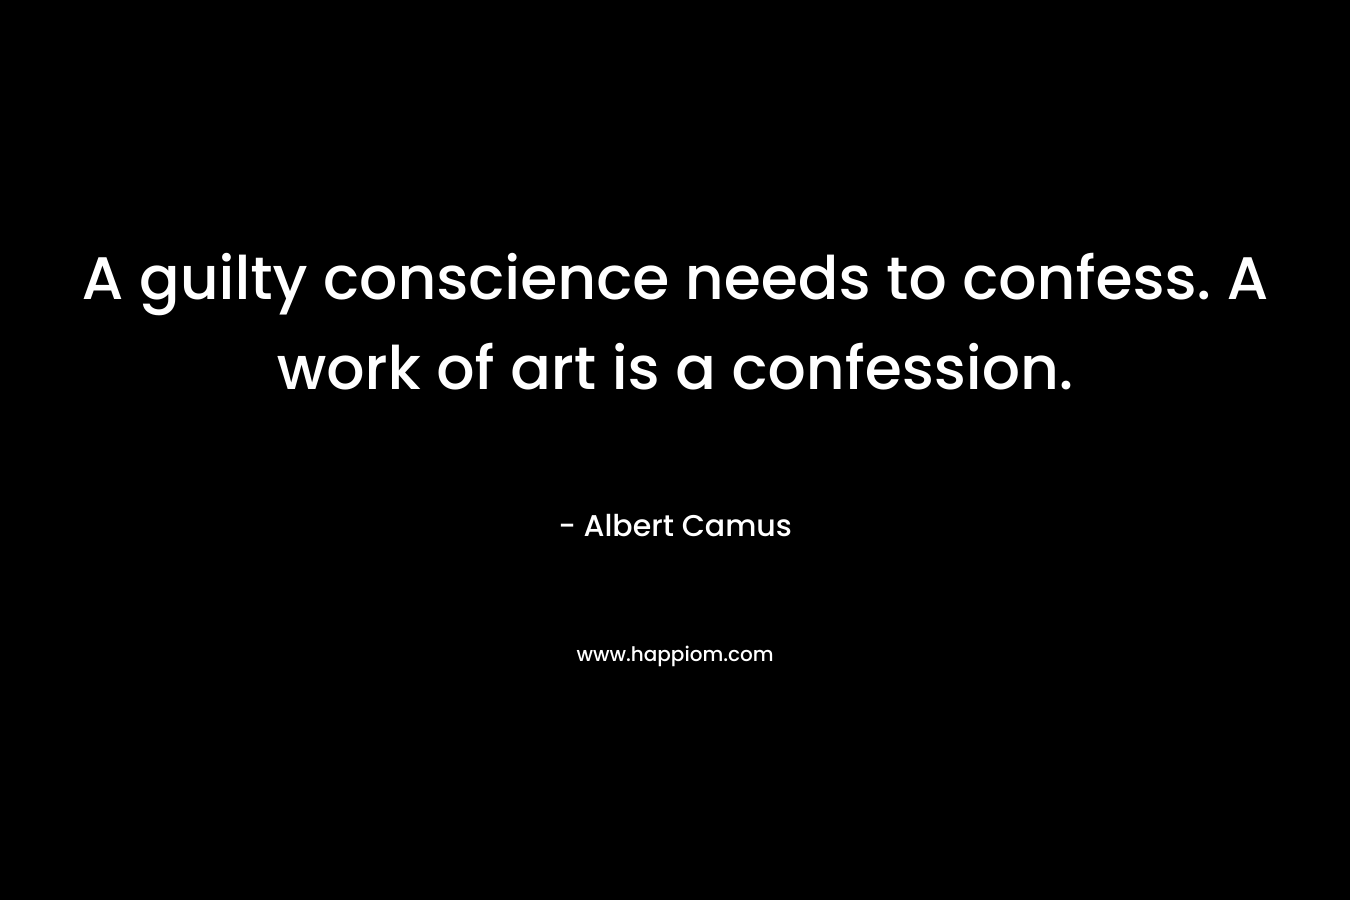 A guilty conscience needs to confess. A work of art is a confession.